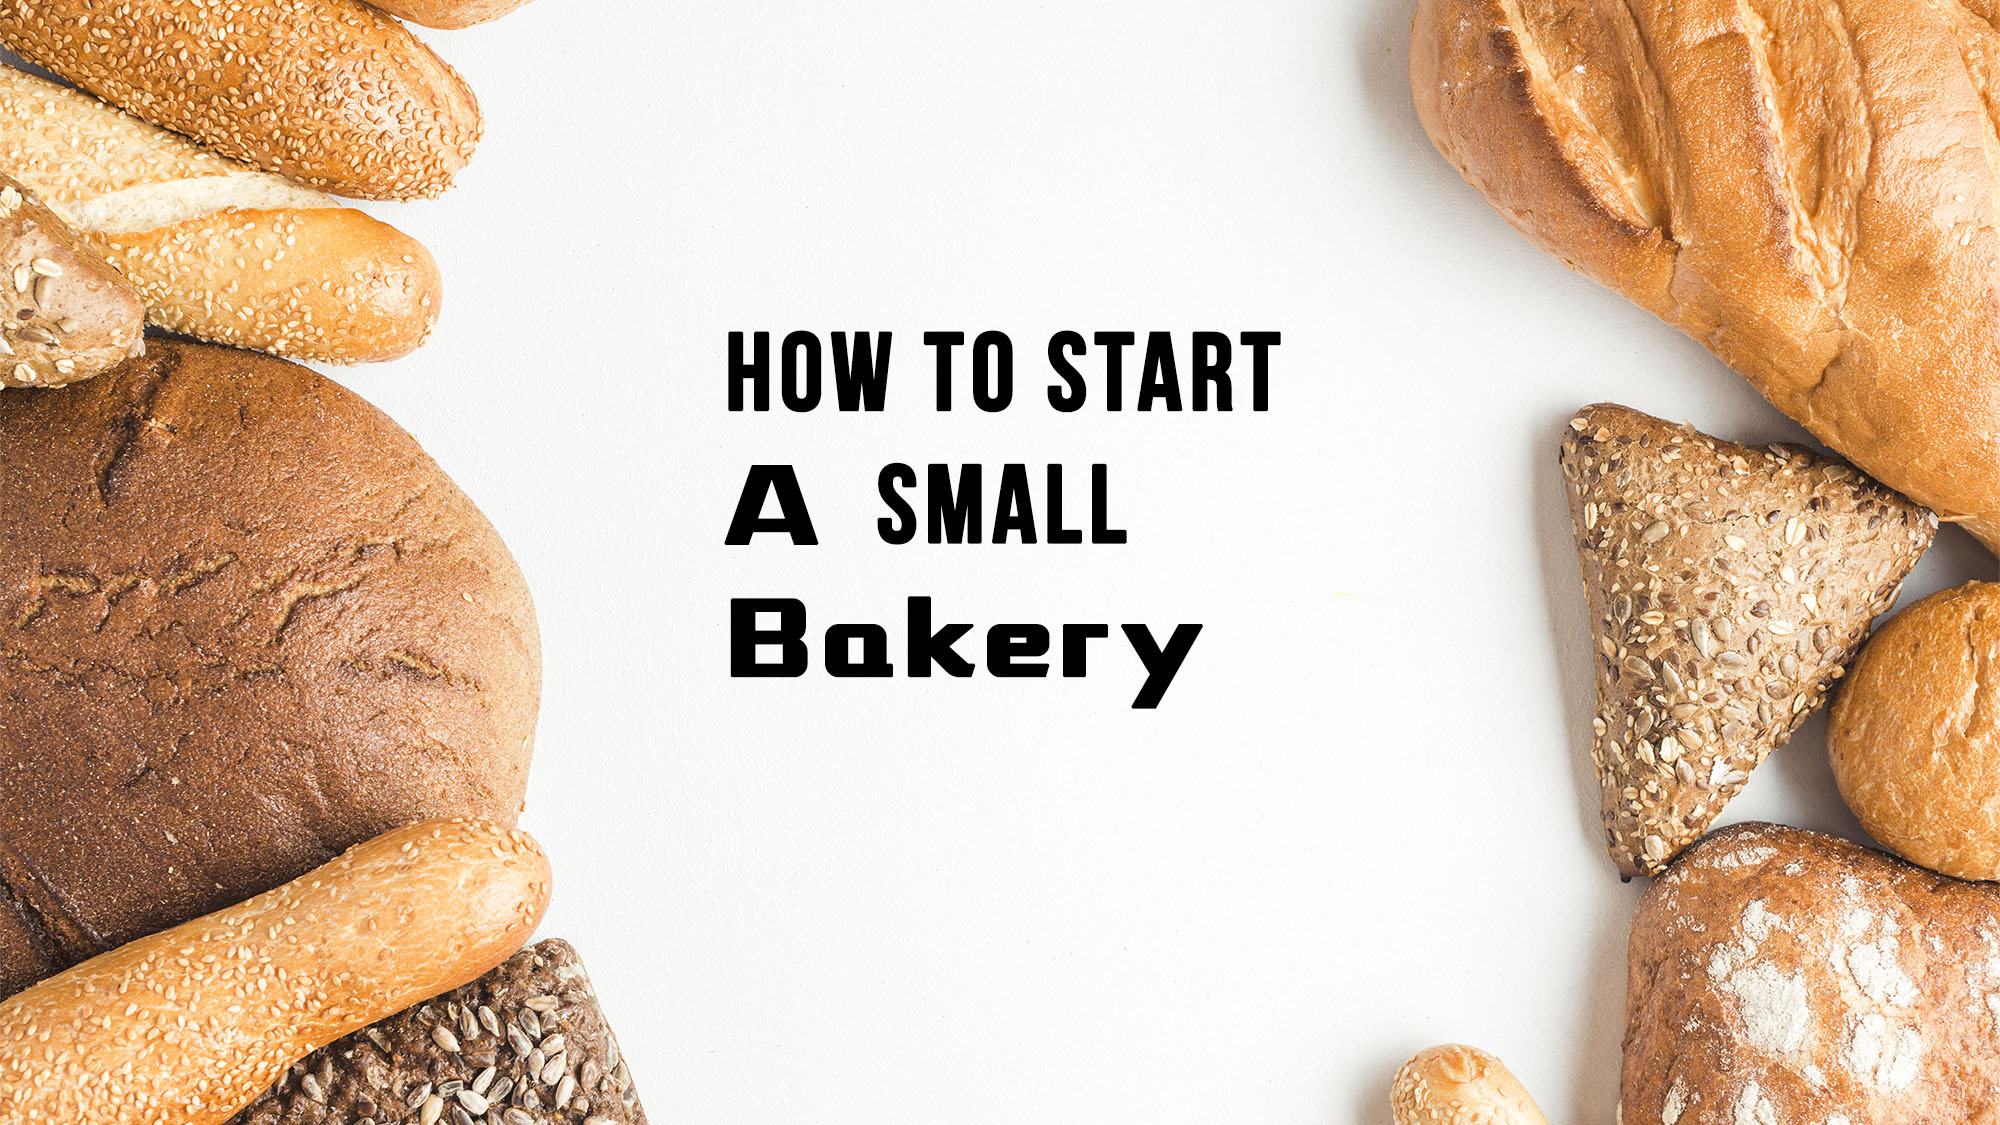 How to start a small, low cost bakery